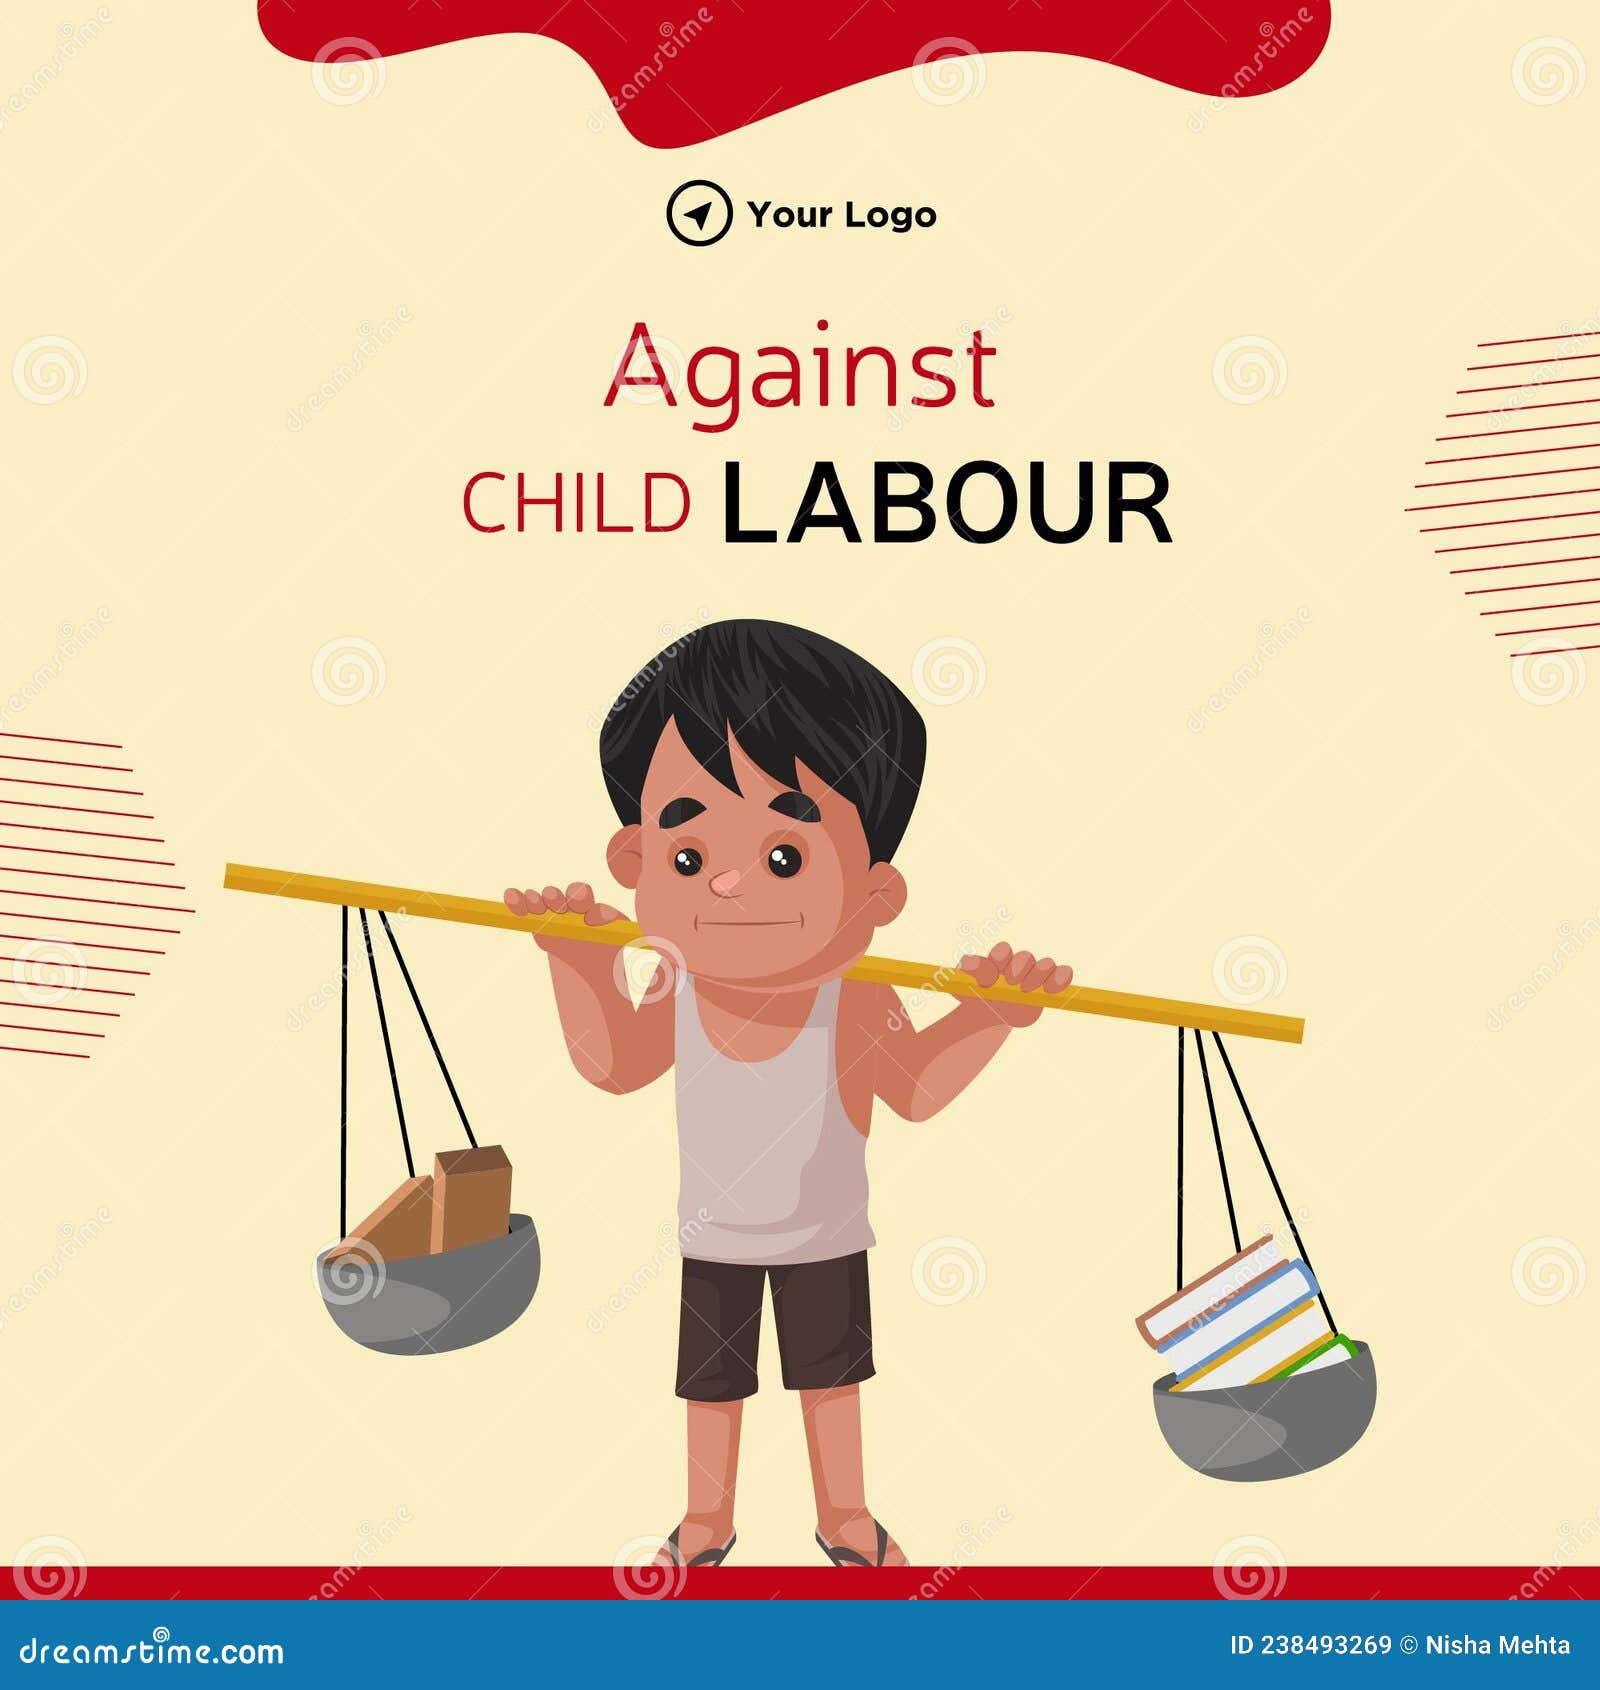 Banner Design of Against Child Labour Stock Vector - Illustration of cute,  construction: 238493269